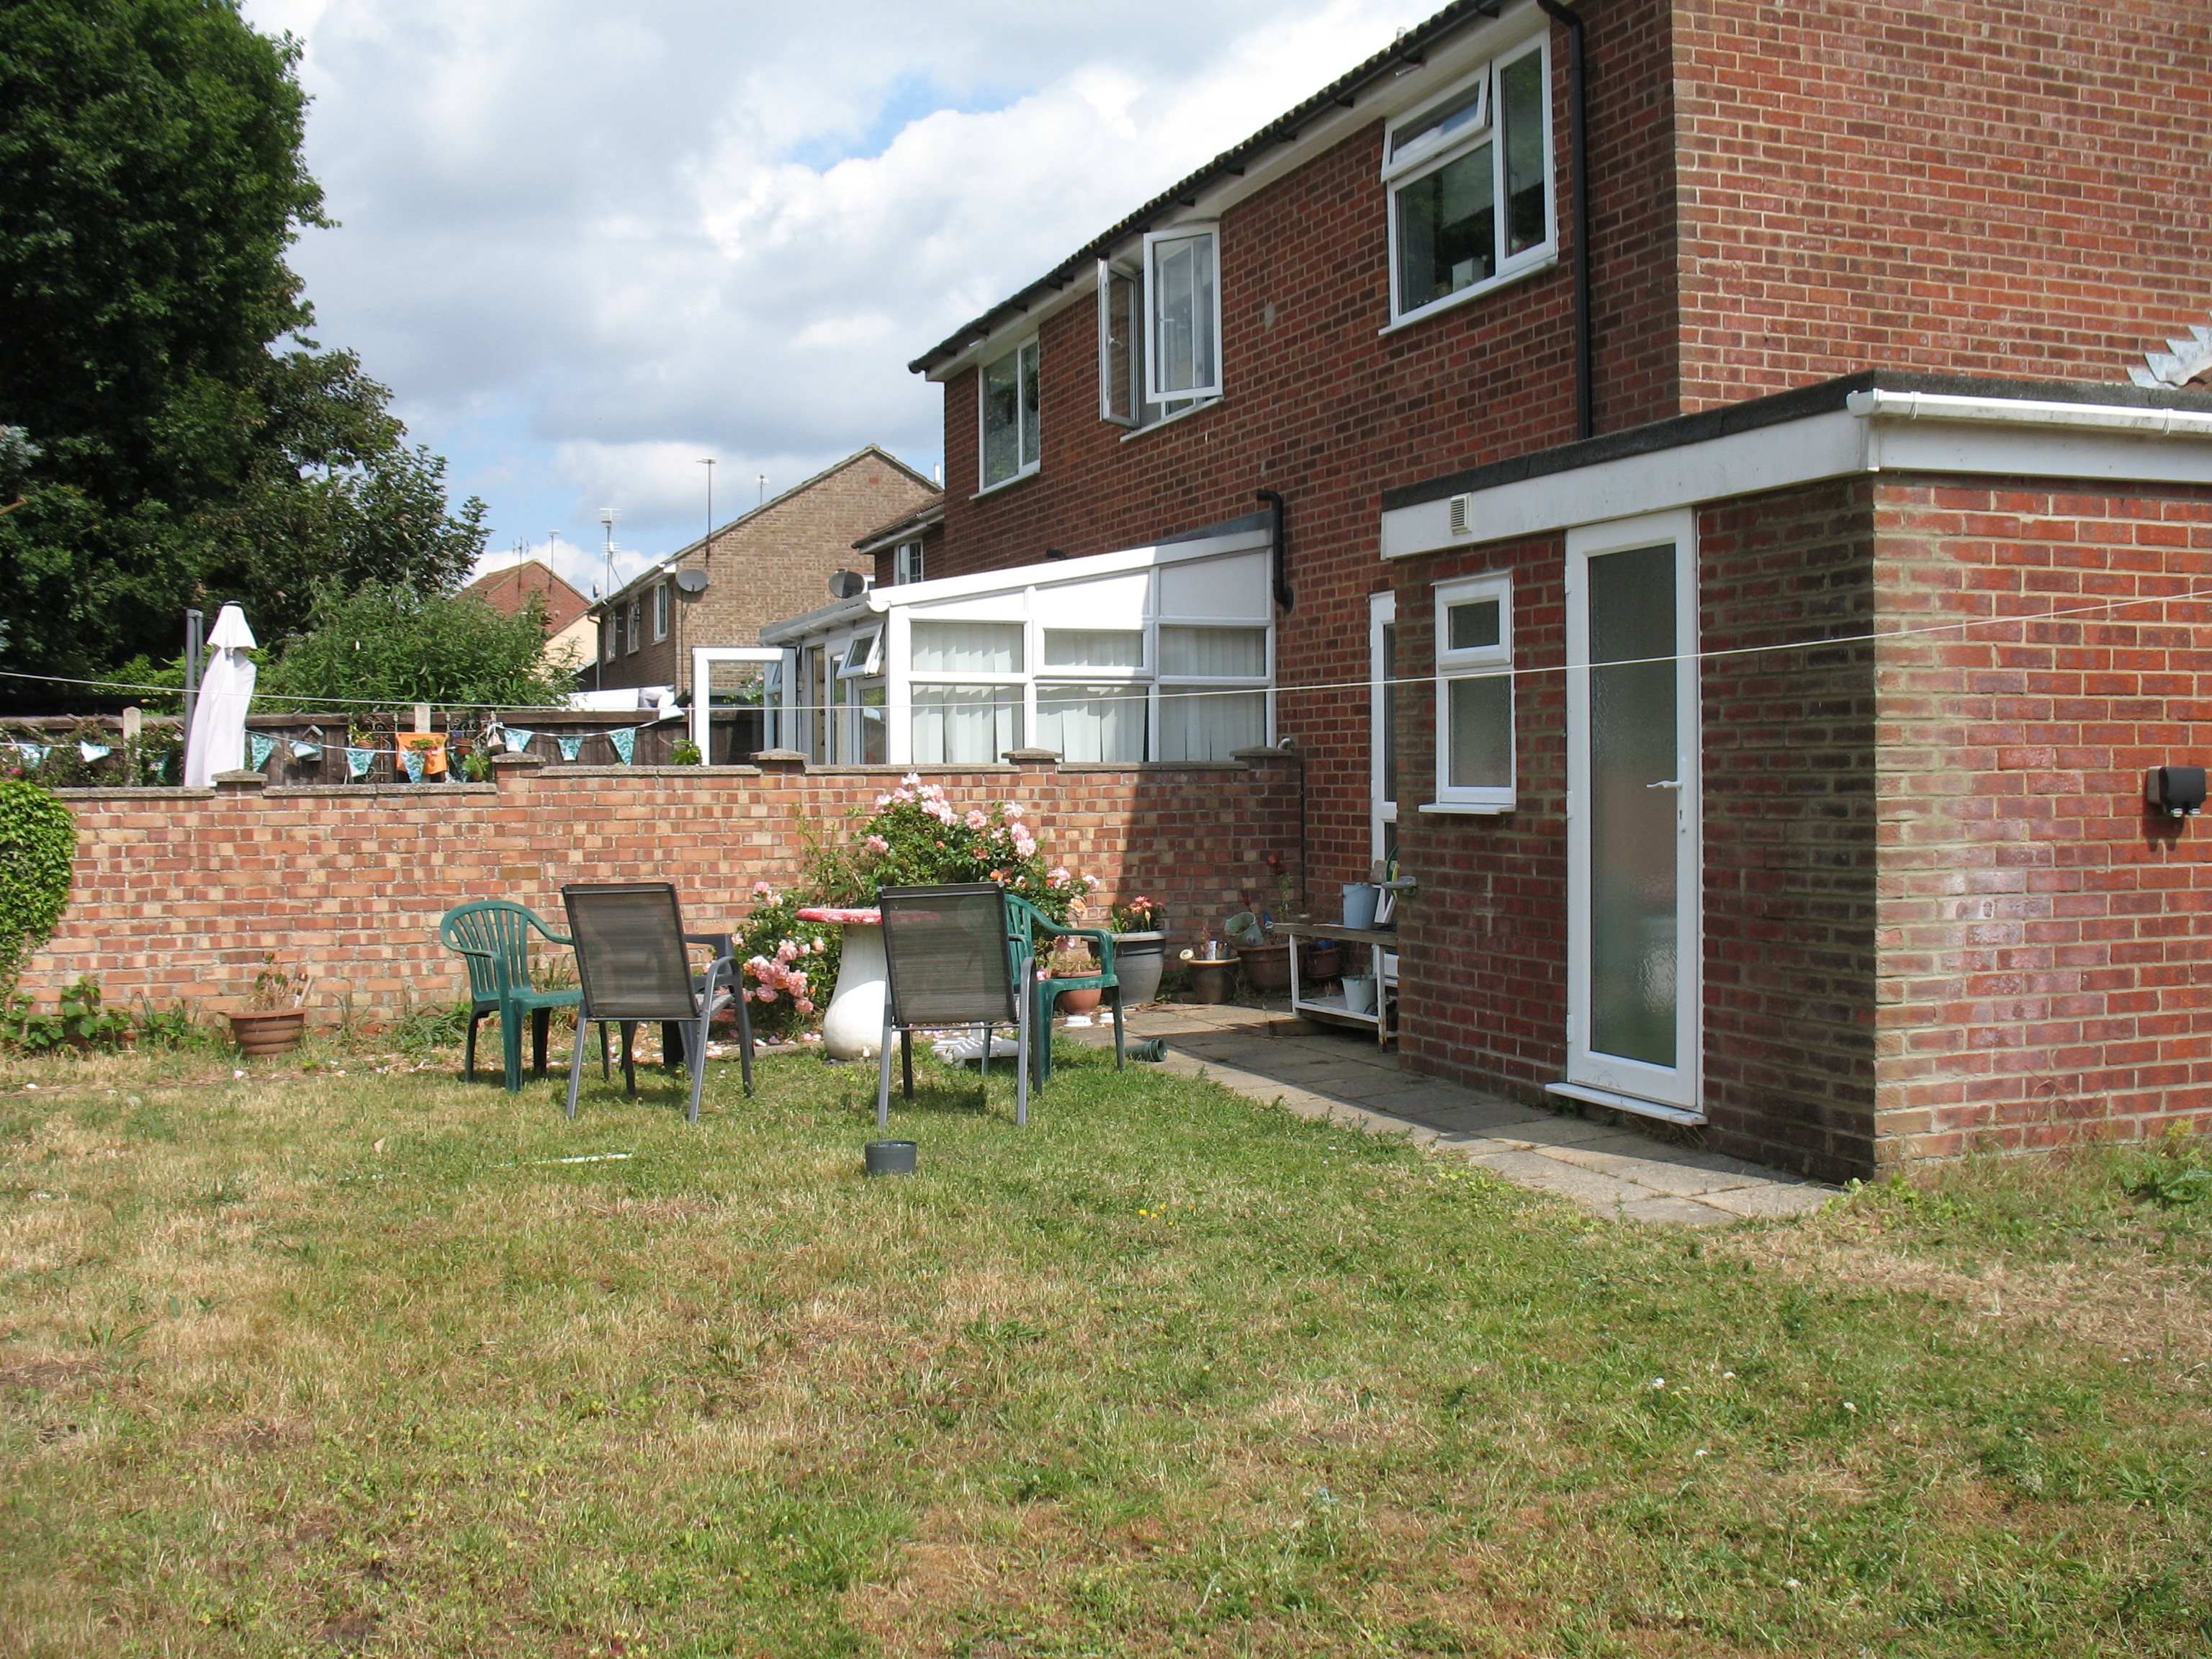 1 bed house / flat share to rent in Henrietta Close, Wivenhoe 0